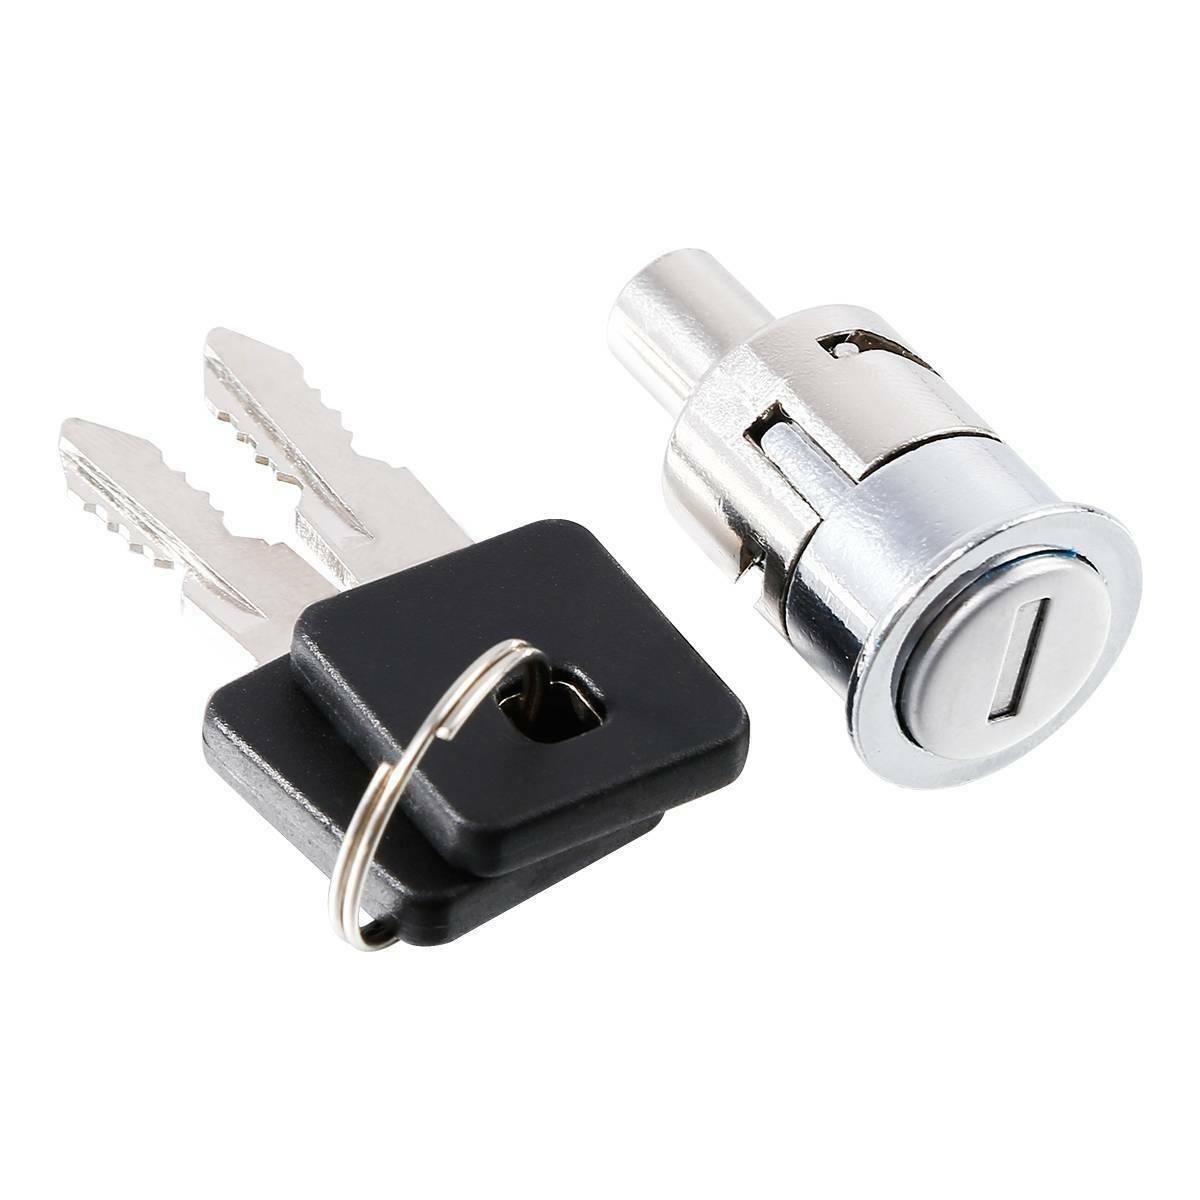 Ignition Switch Lock key Set Fit For Harley Sportster XL 883 95-03 1996 1997 98 - Moto Life Products